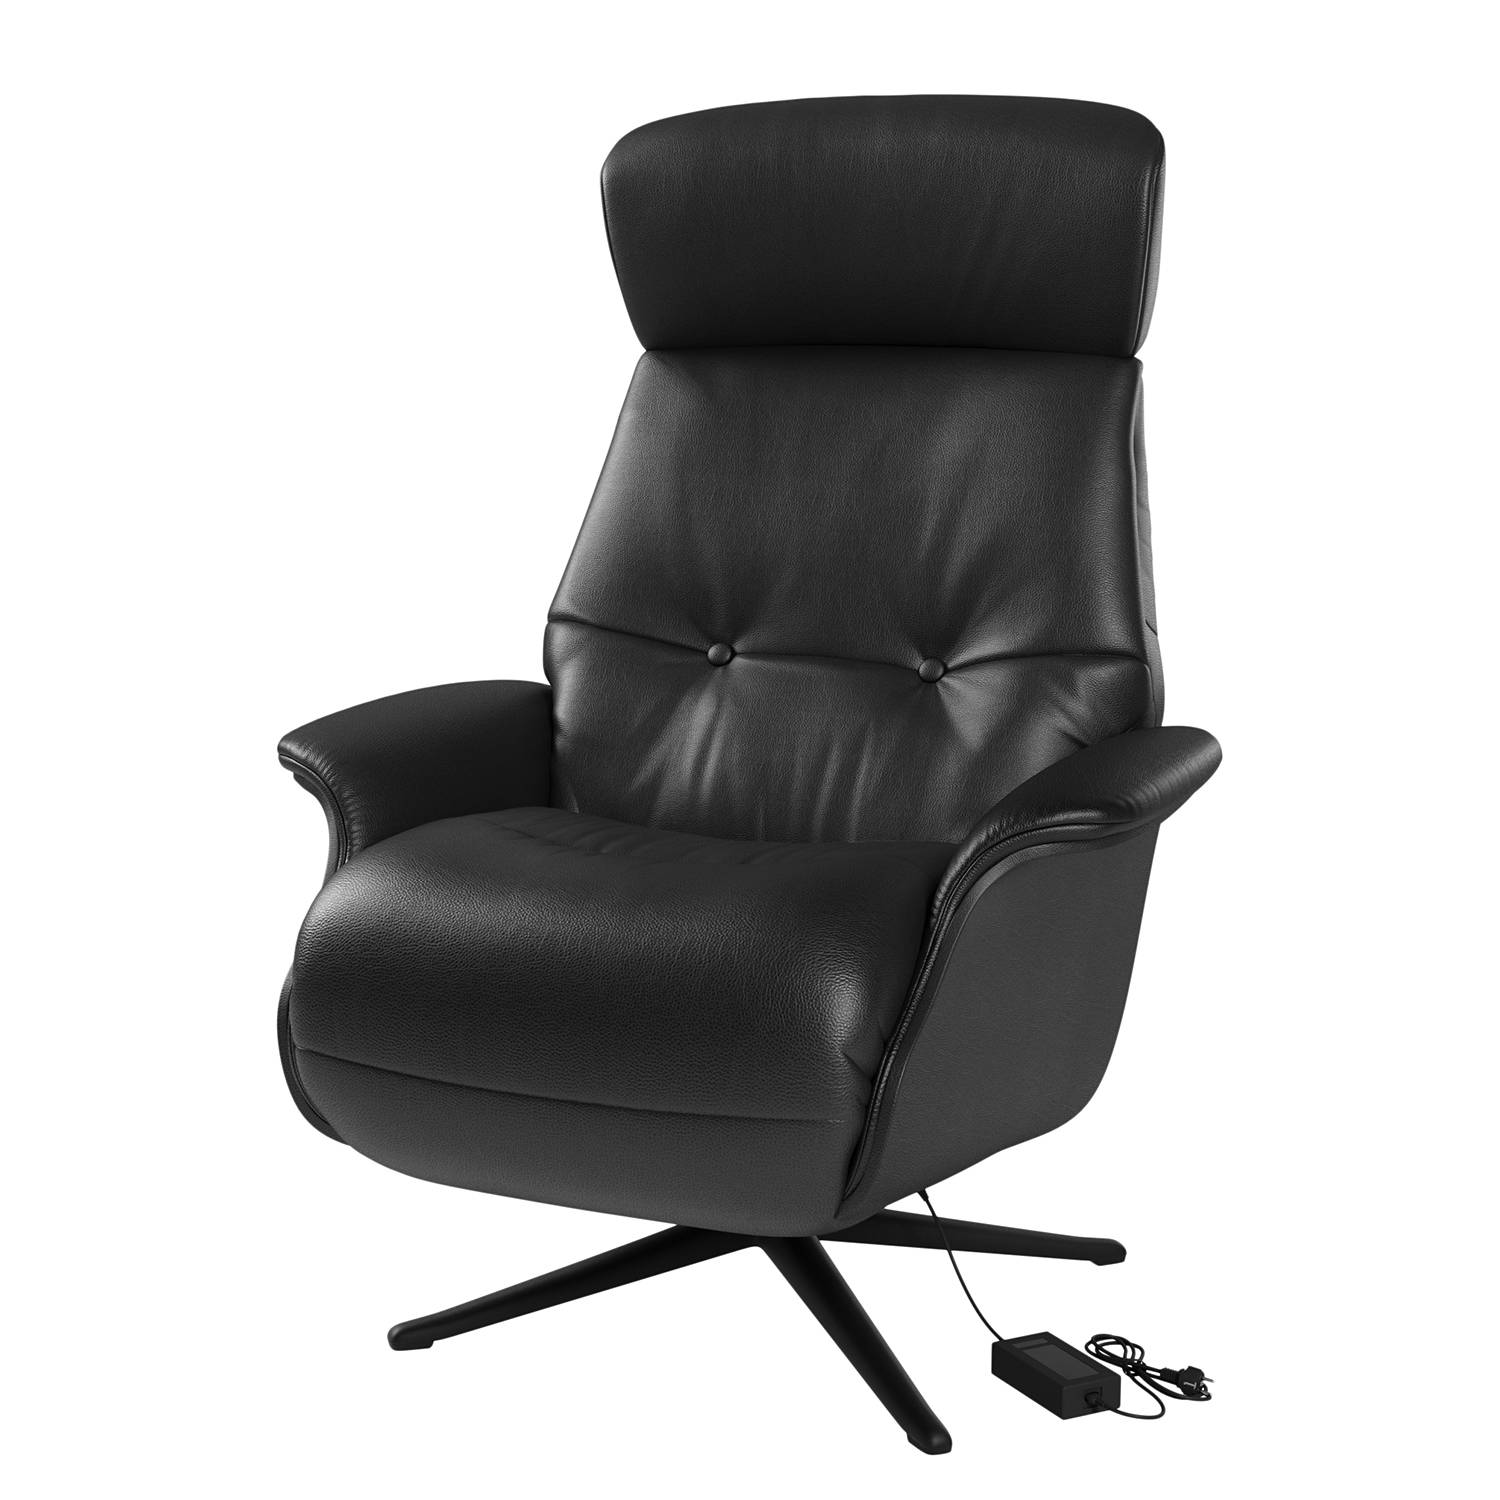 Image of Fauteuil relax Anderson VI 000000001000131462